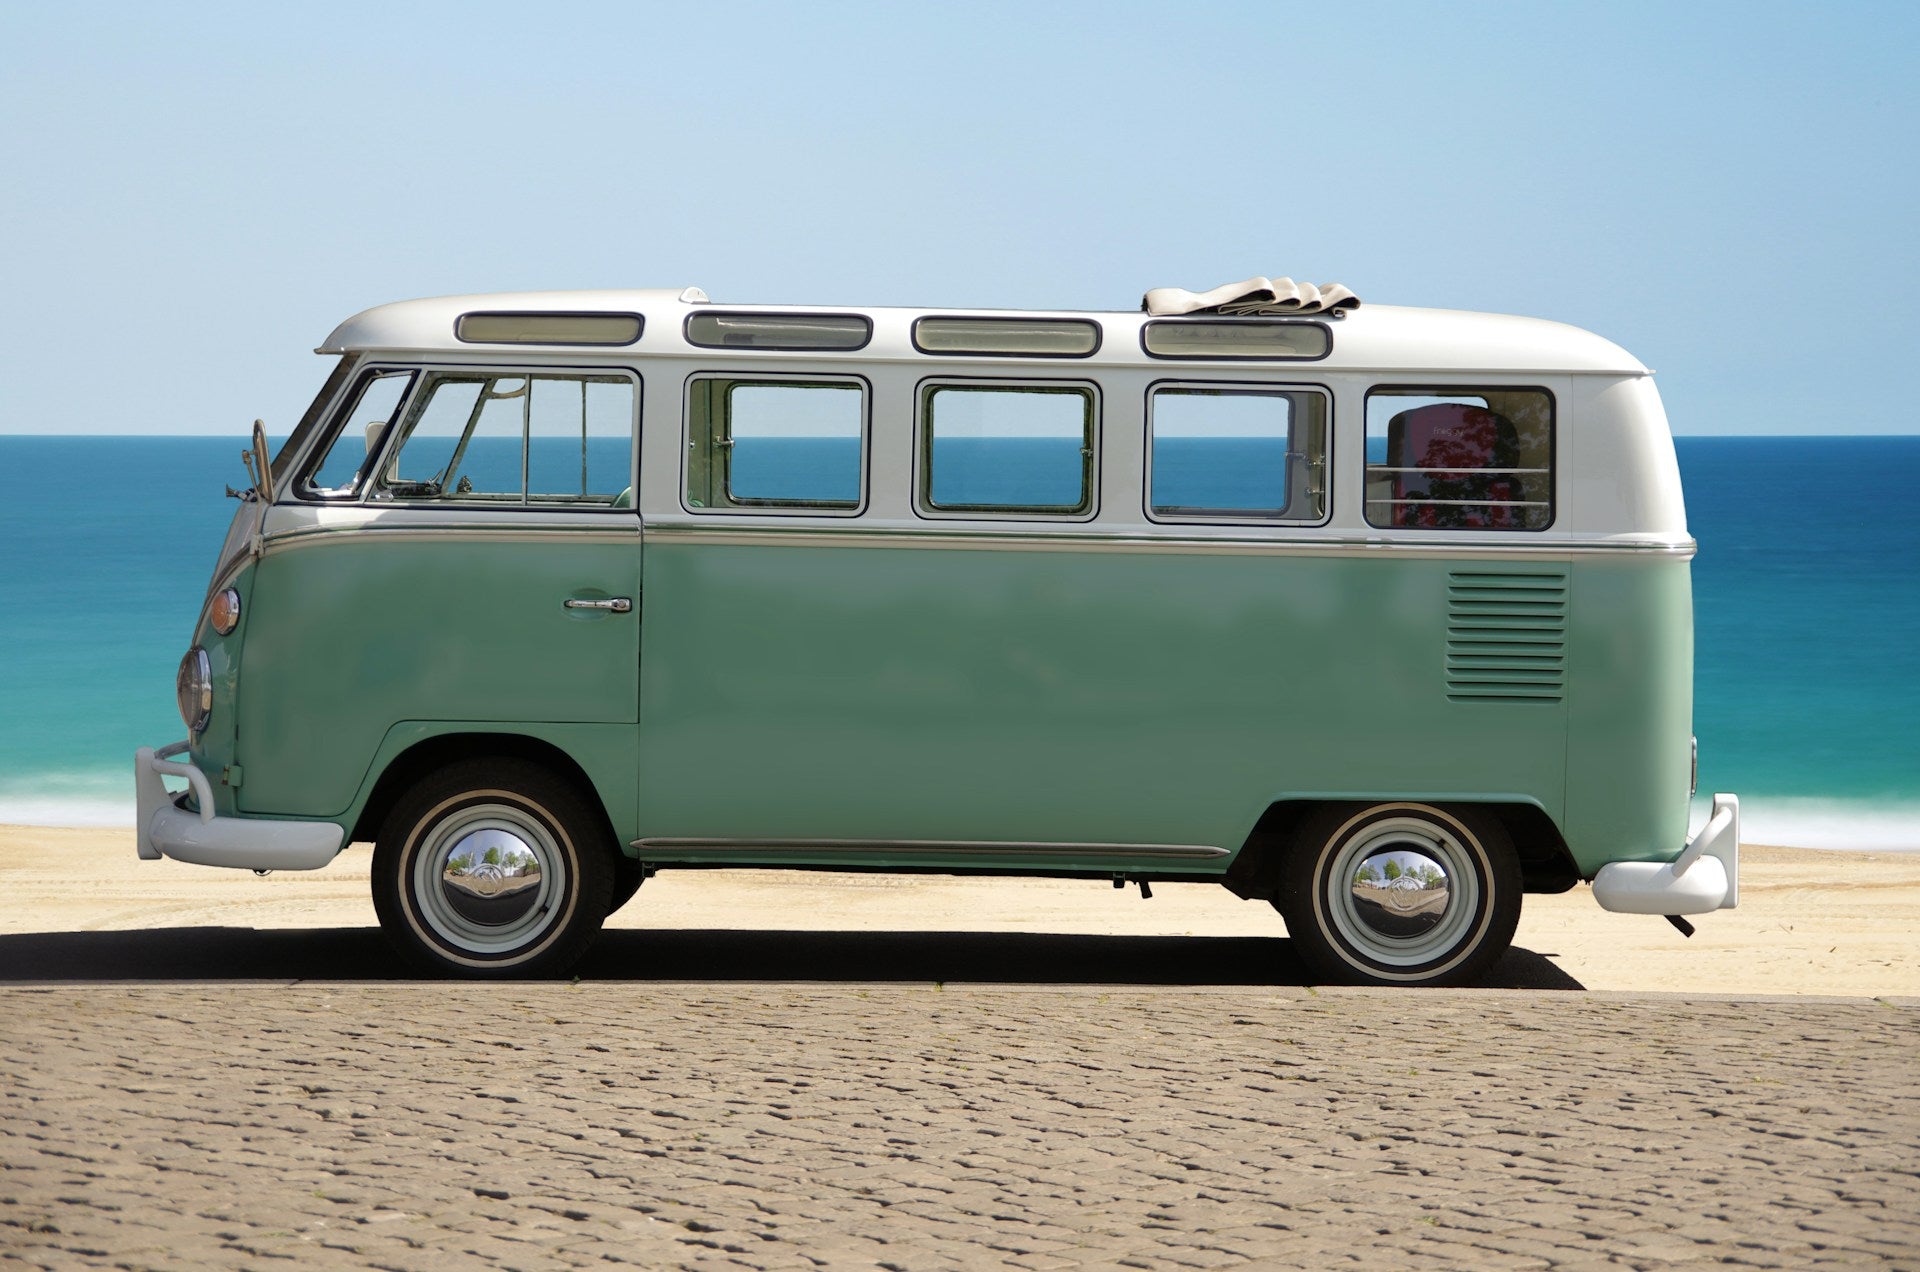 What Should You Pack for a Camper Van Holiday? Top 10 Packing Tips